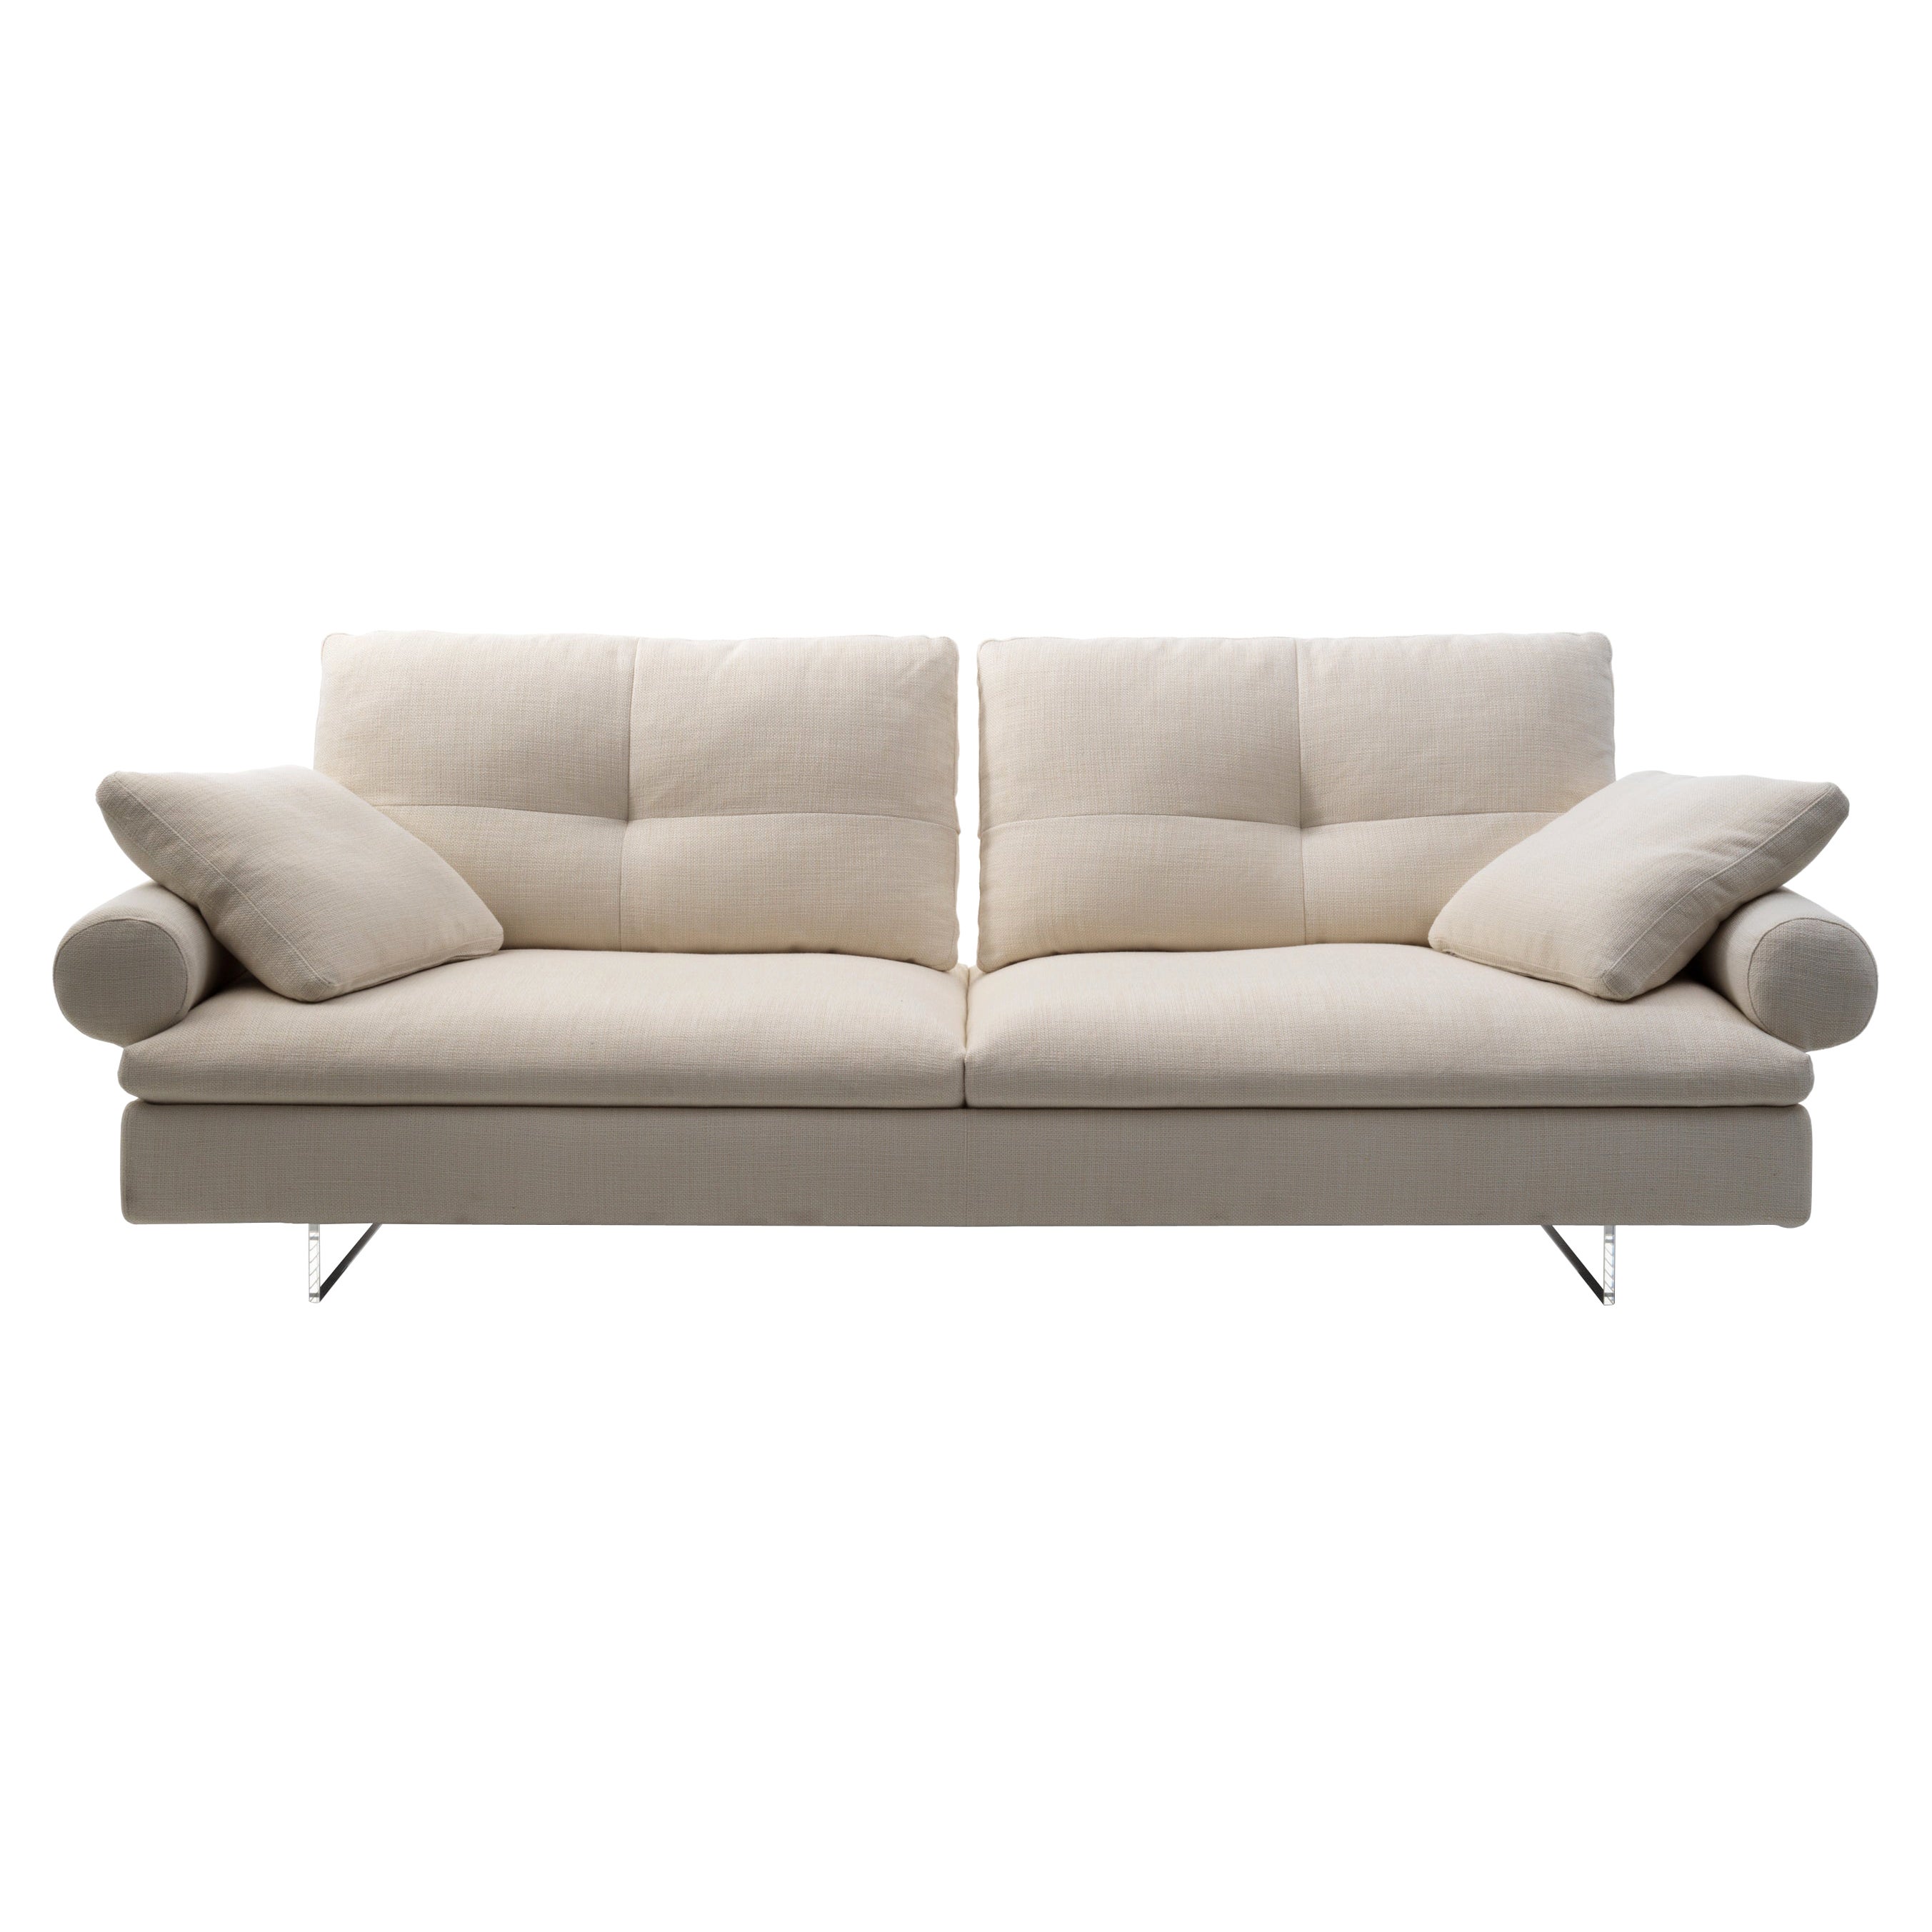 Limes New 88 Large Sofa in Beige Upholstery with Roll Armrest by Sergio Bicego